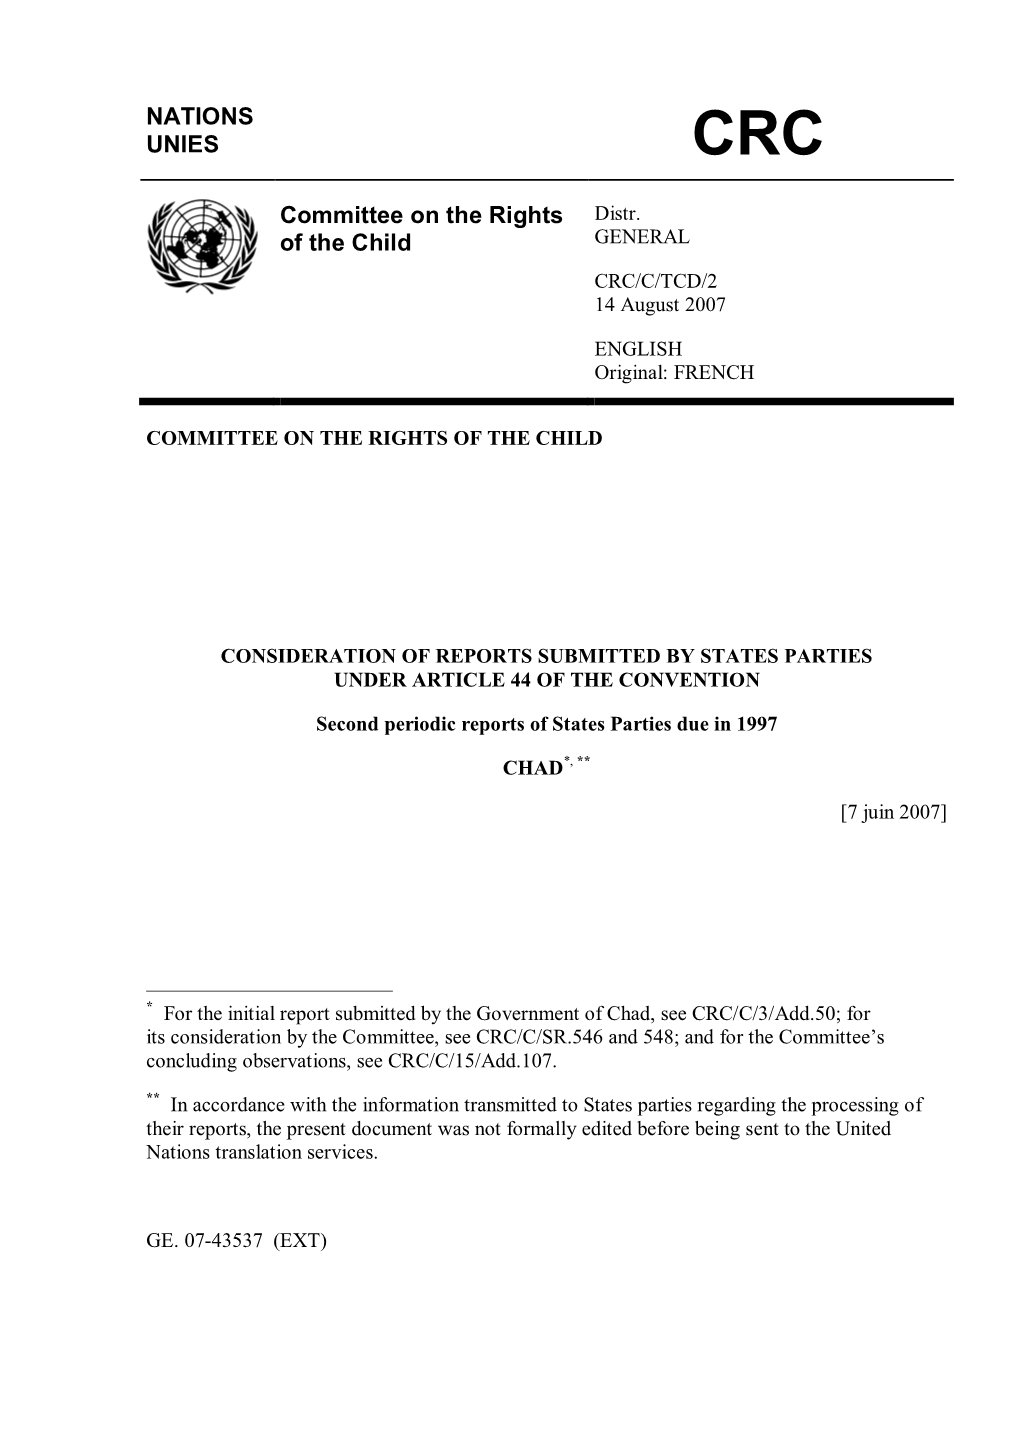 NATIONS UNIES Committee on the Rights of the Child